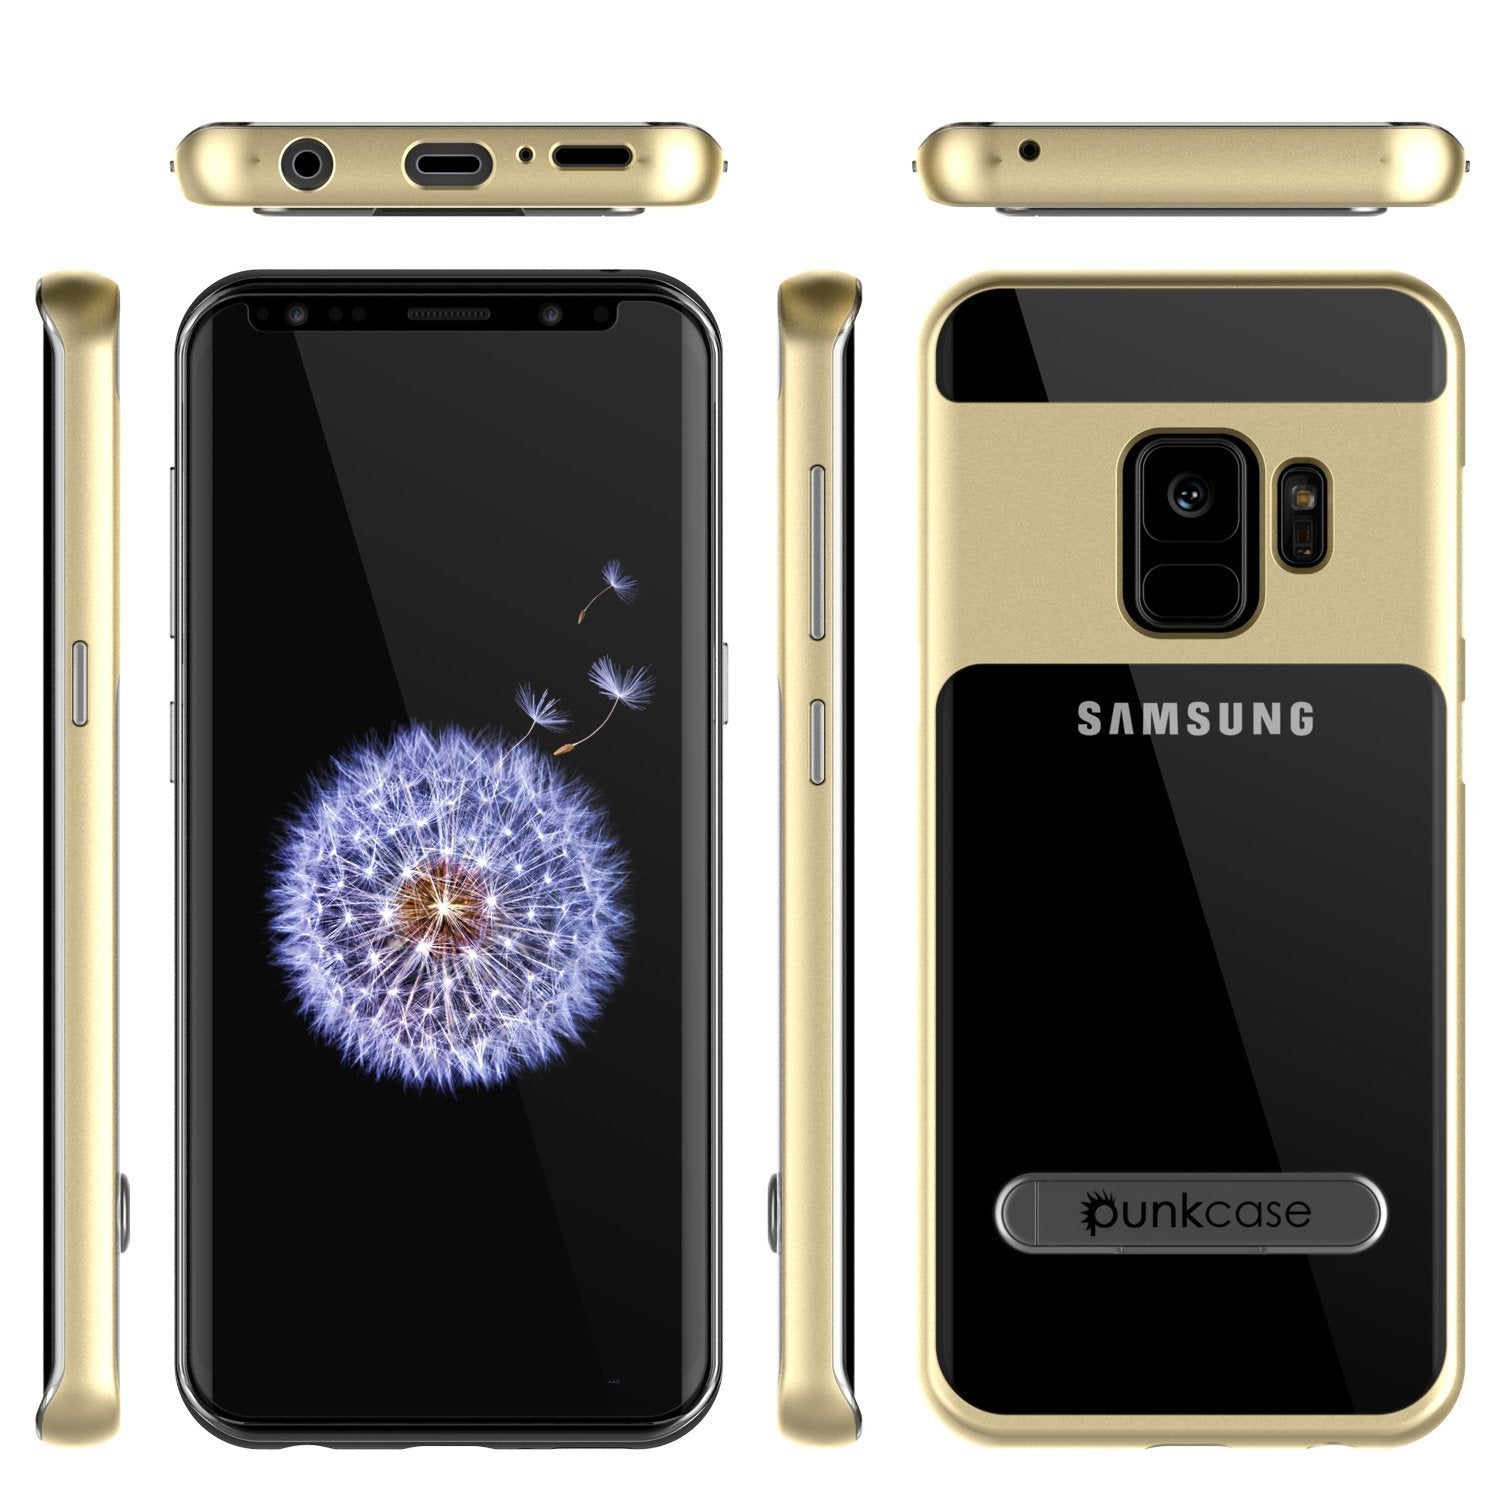 Galaxy S9 Punkcase, LUCID 3.0 Series Cover w/Kickstand, [Gold]